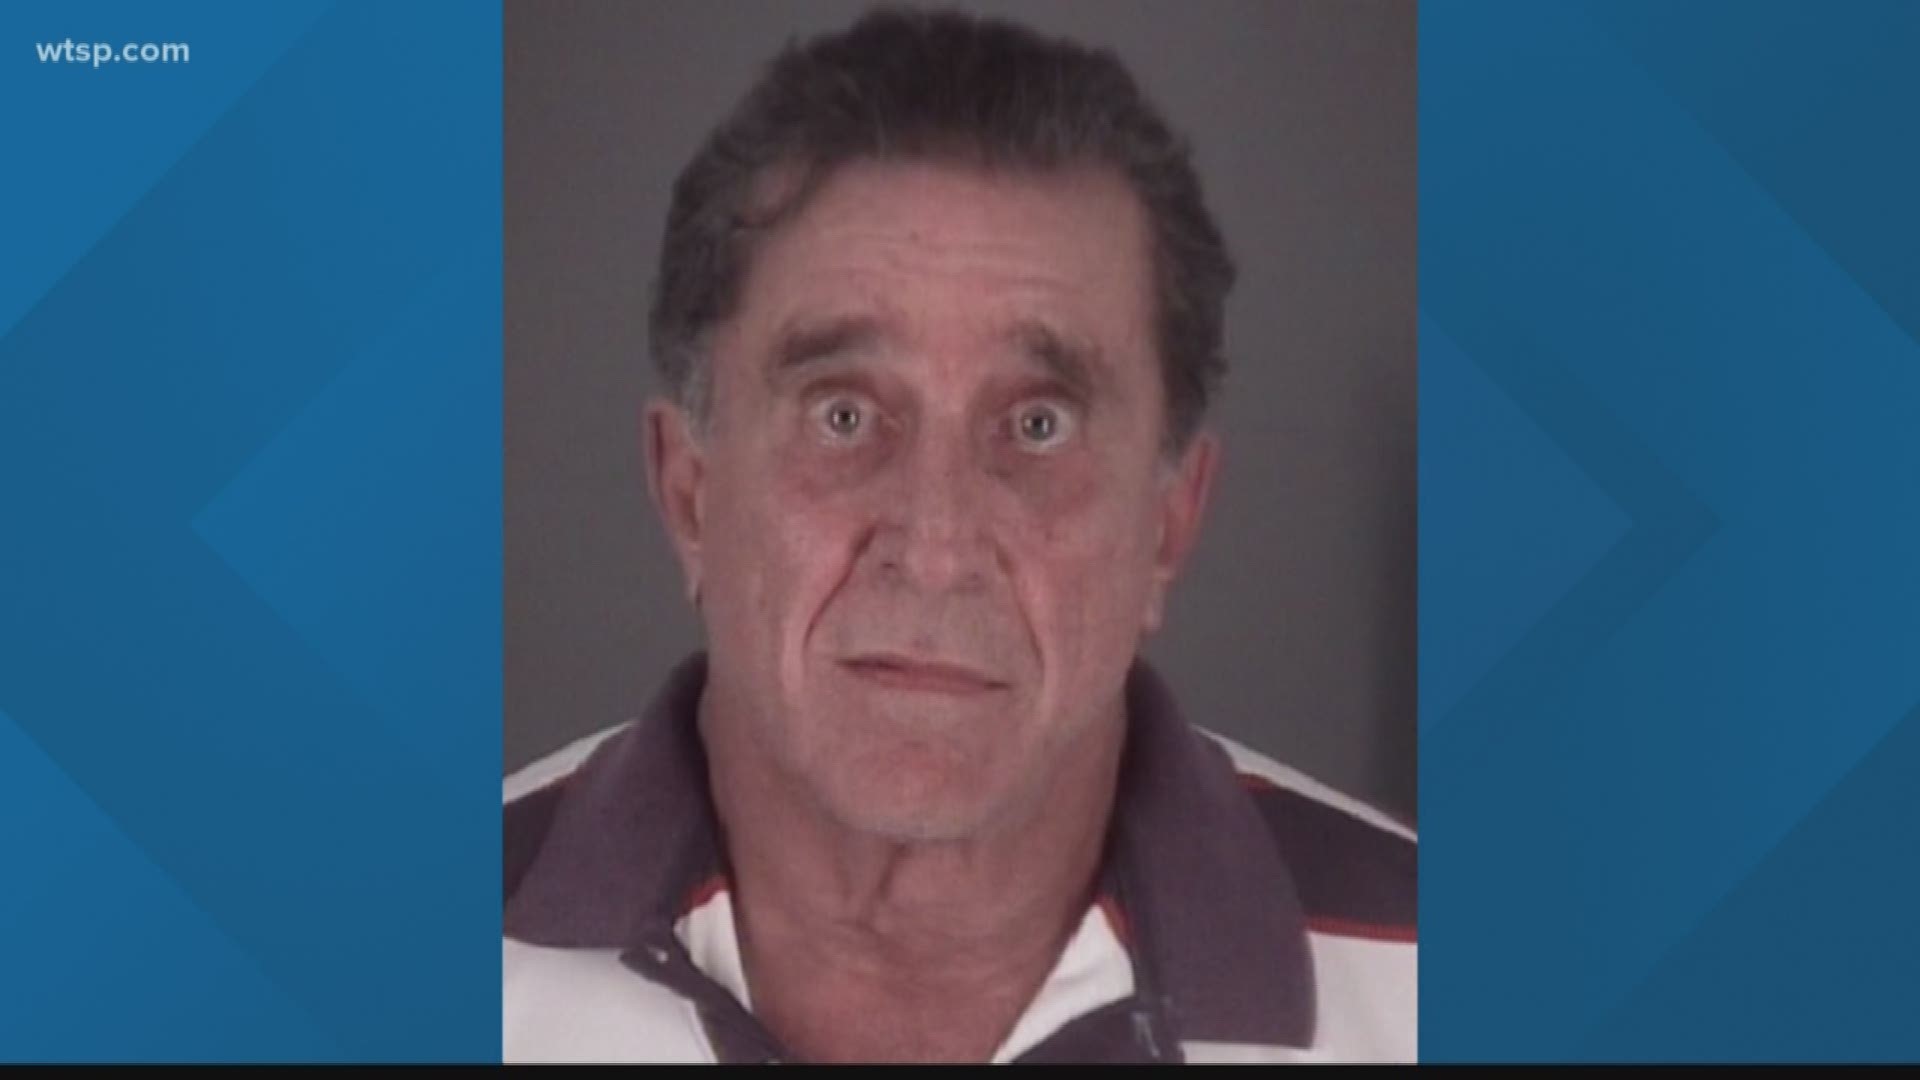 Dale Massad was arrested Thursday after allegedly shooting at deputies serving a search warrant at his home. The city's residents are stunned.